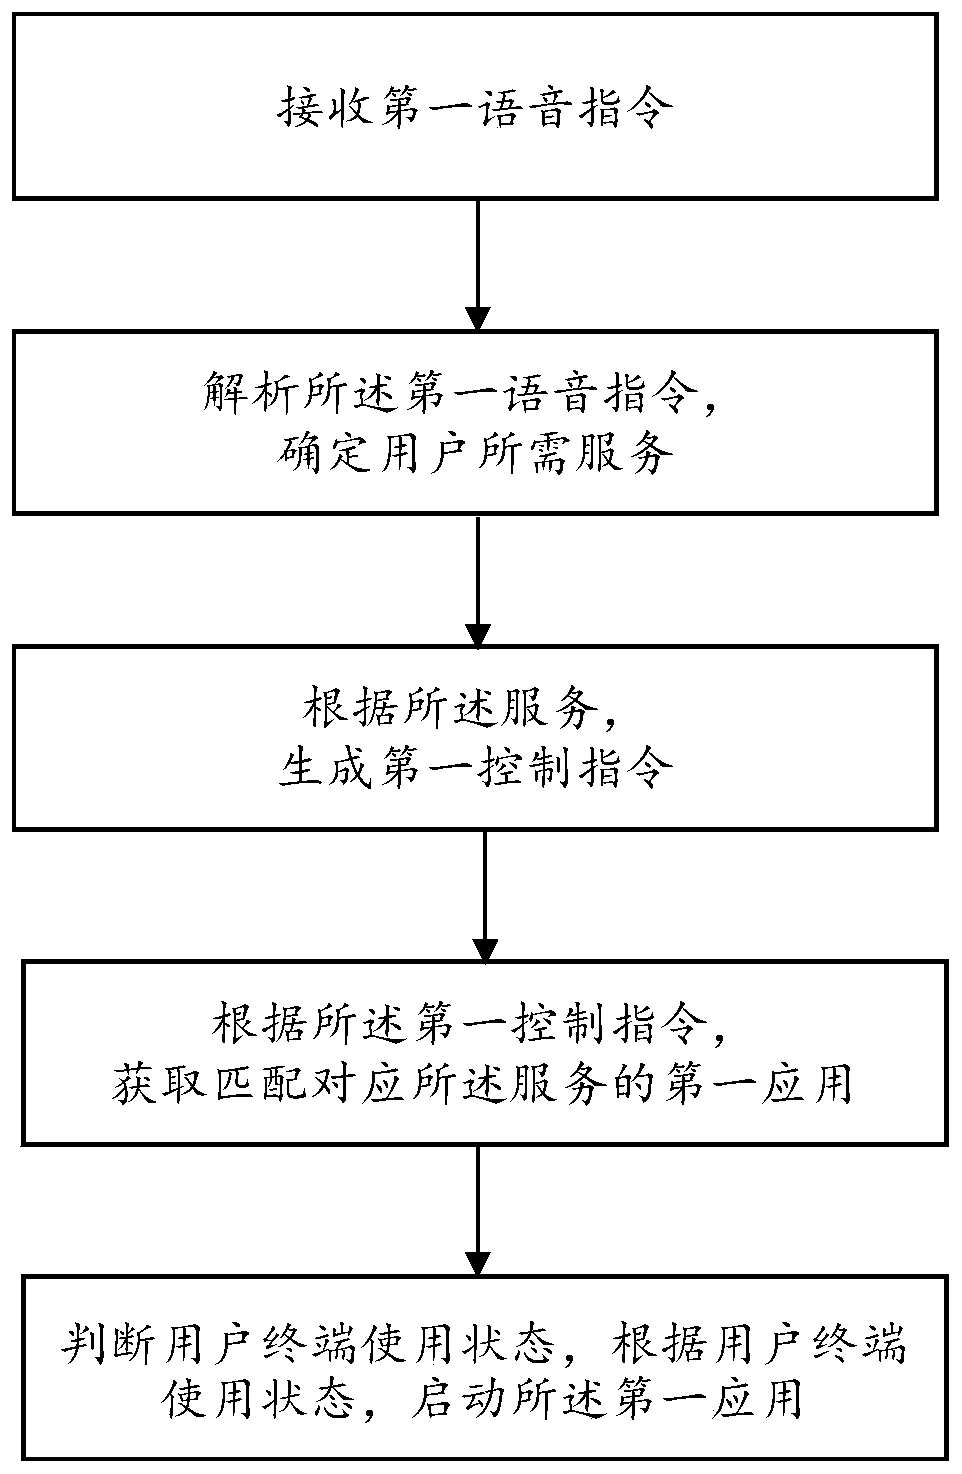 Application management method and device based on voice control